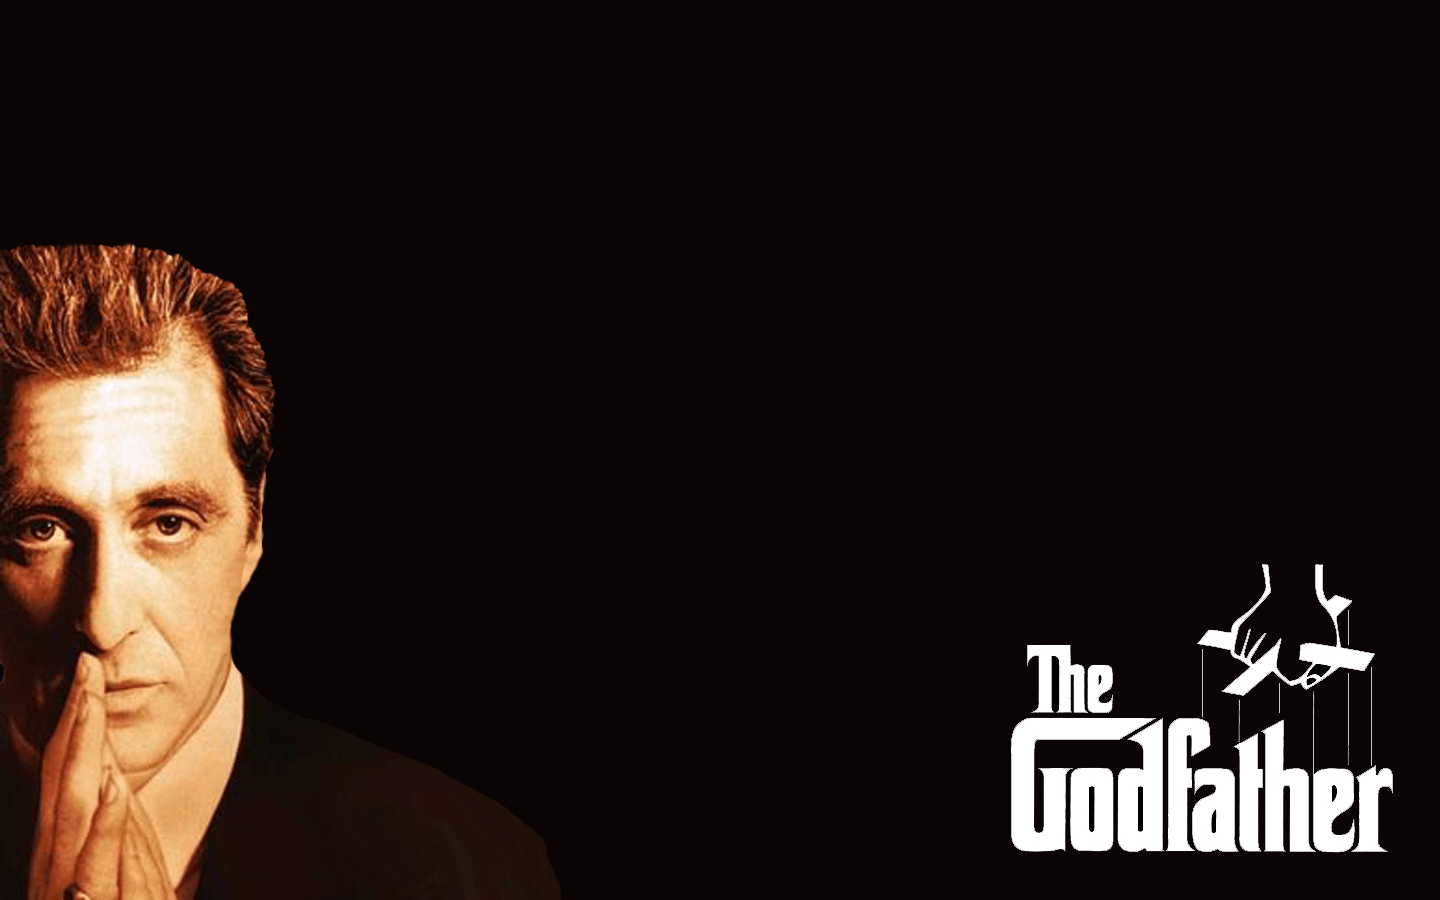 Wallpaper For > The Godfather 3 Wallpaper